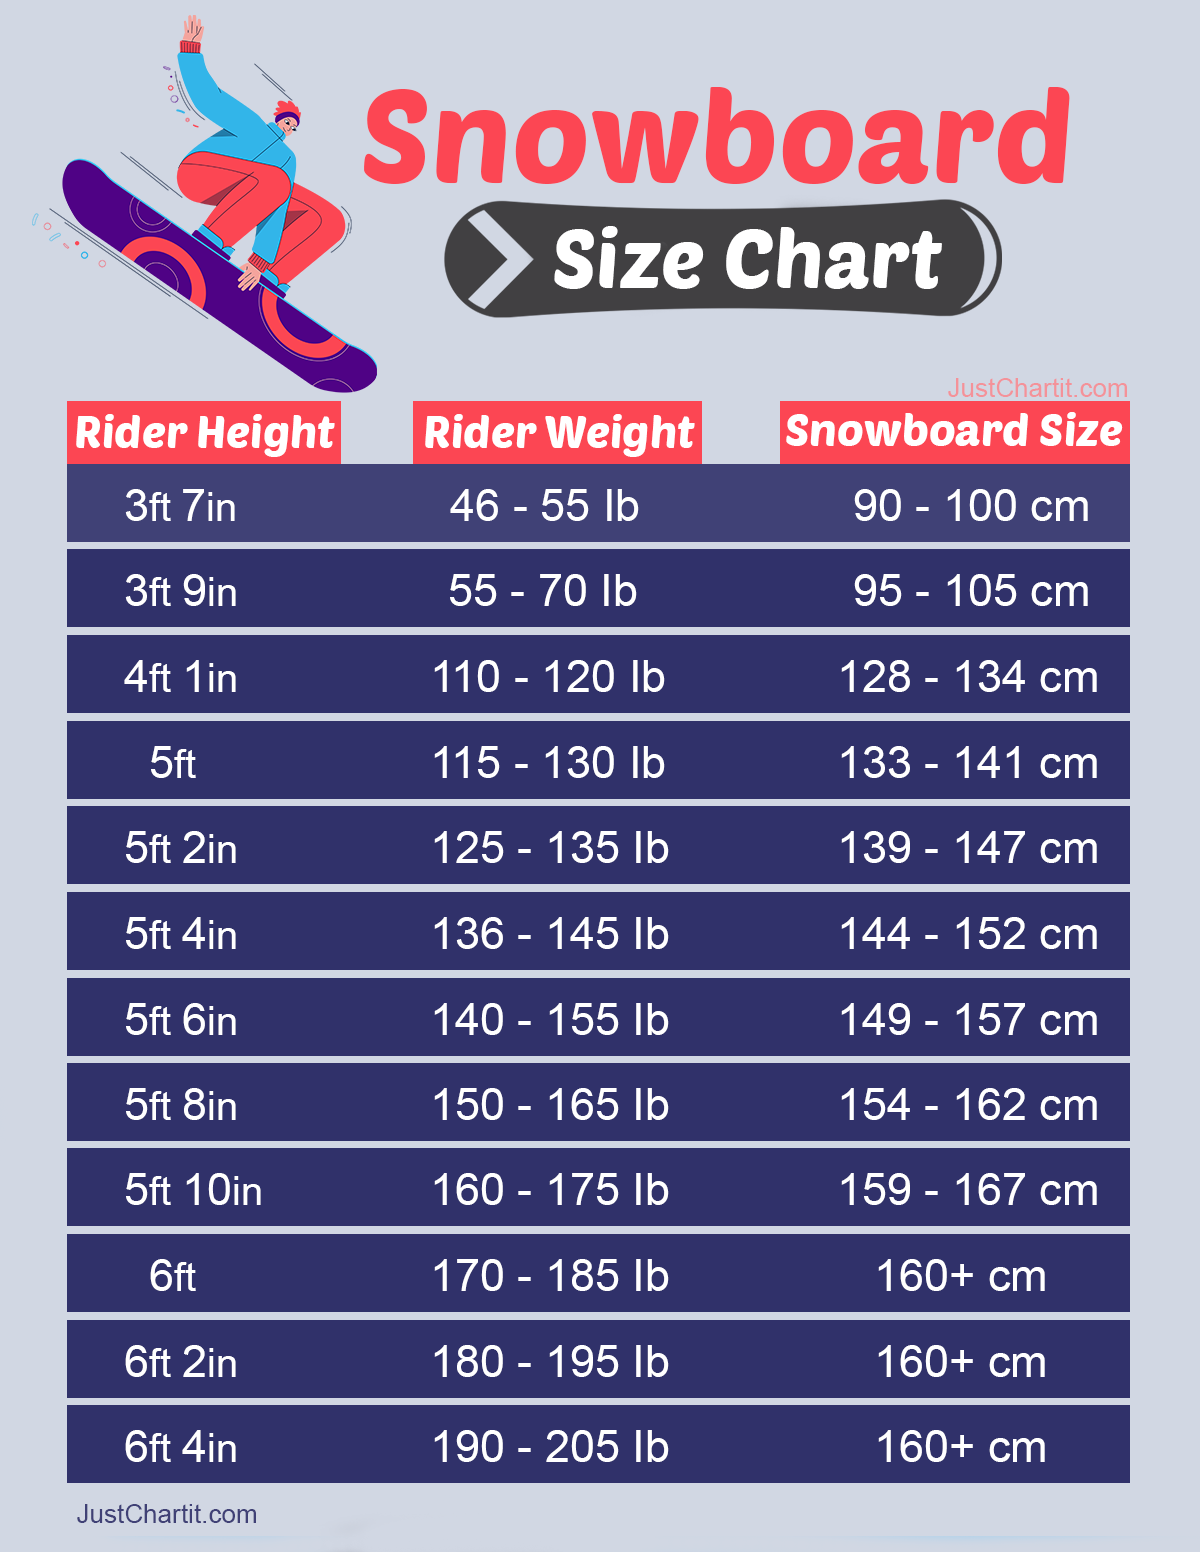 Snowboard Size Chart for by Age & Height